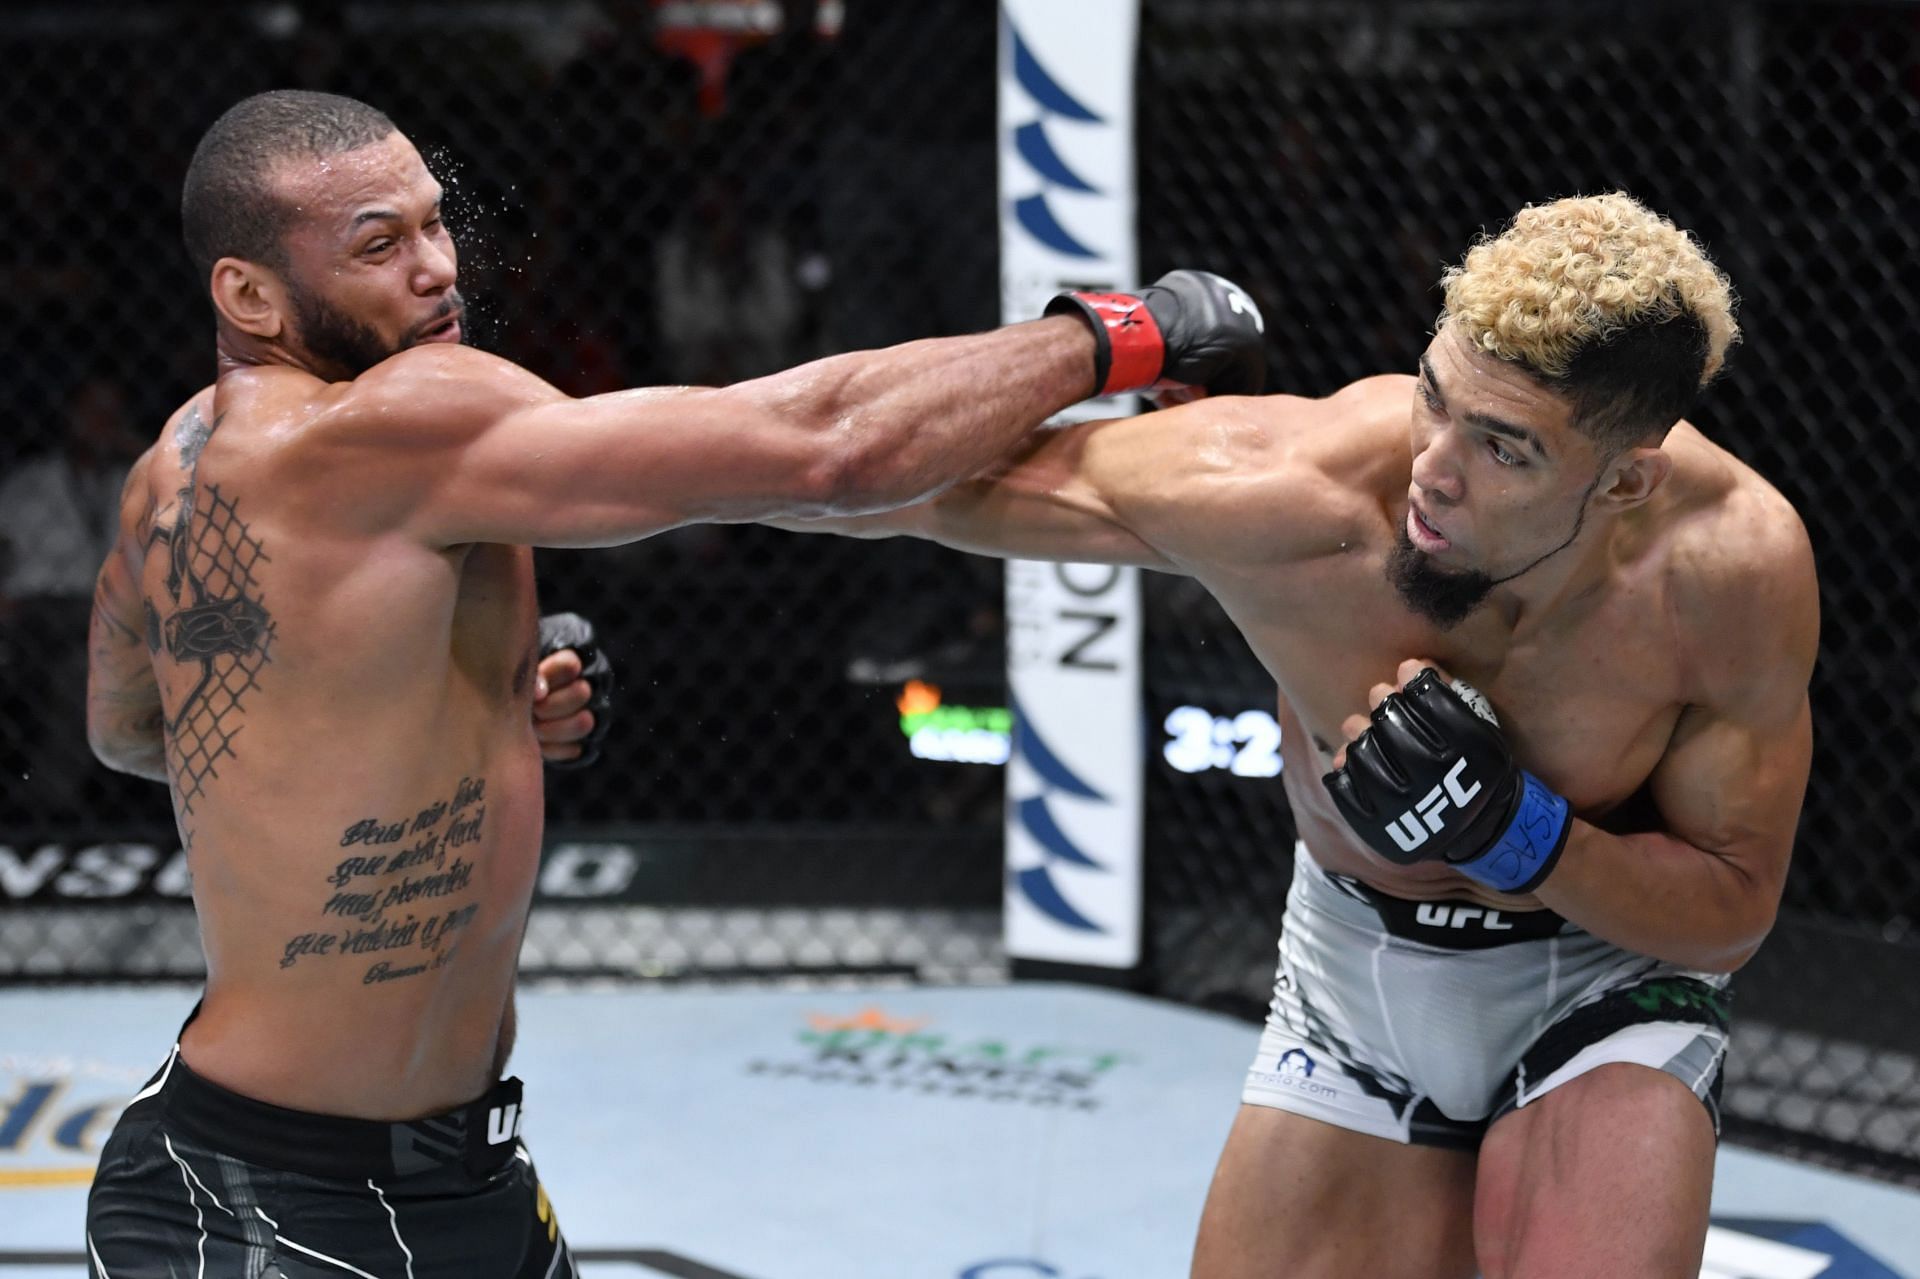 It was hard not to be disappointed by the fight between Thiago Santos and Johnny Walker